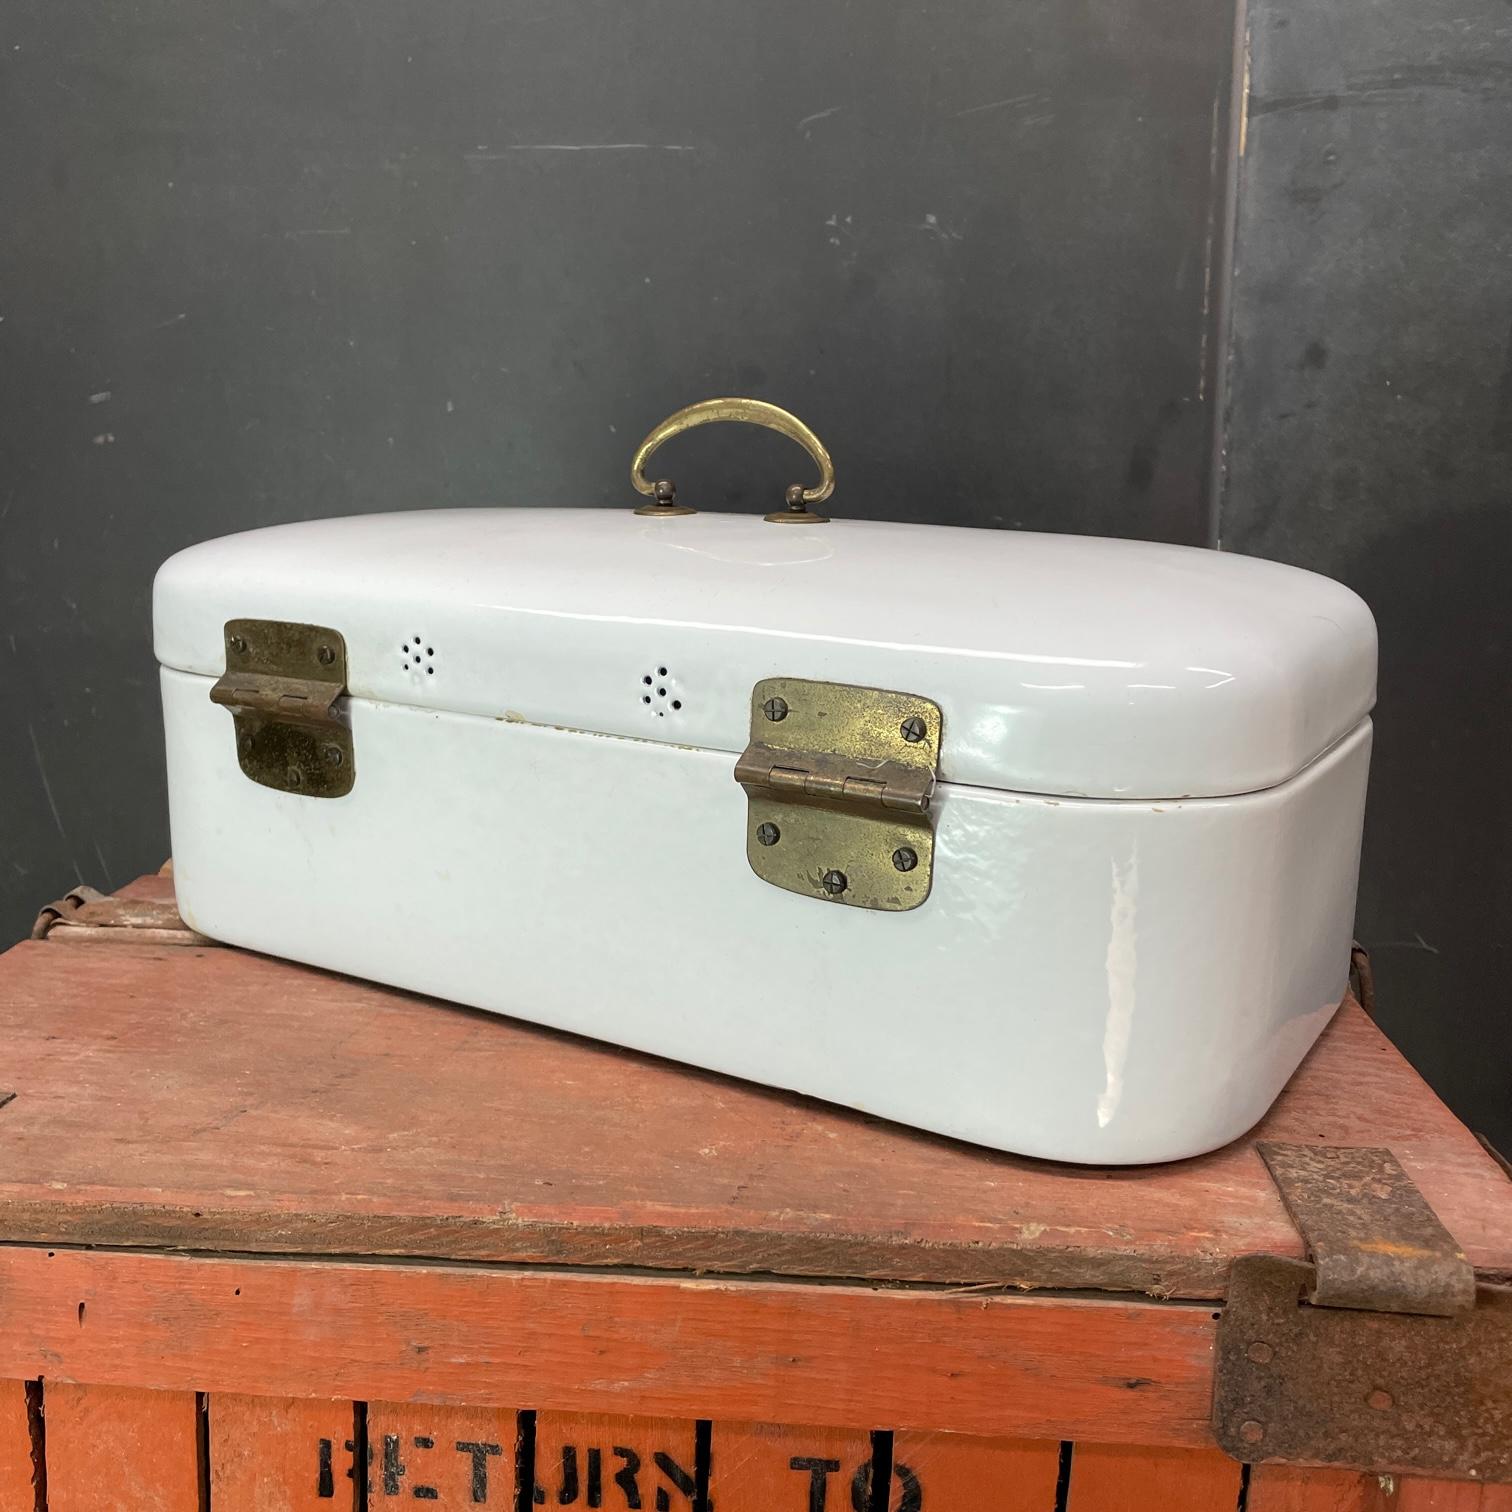 Early 20th Century White Enamel Brass Hinged Box Remote Trinket Storage Decor In Fair Condition For Sale In Hyattsville, MD